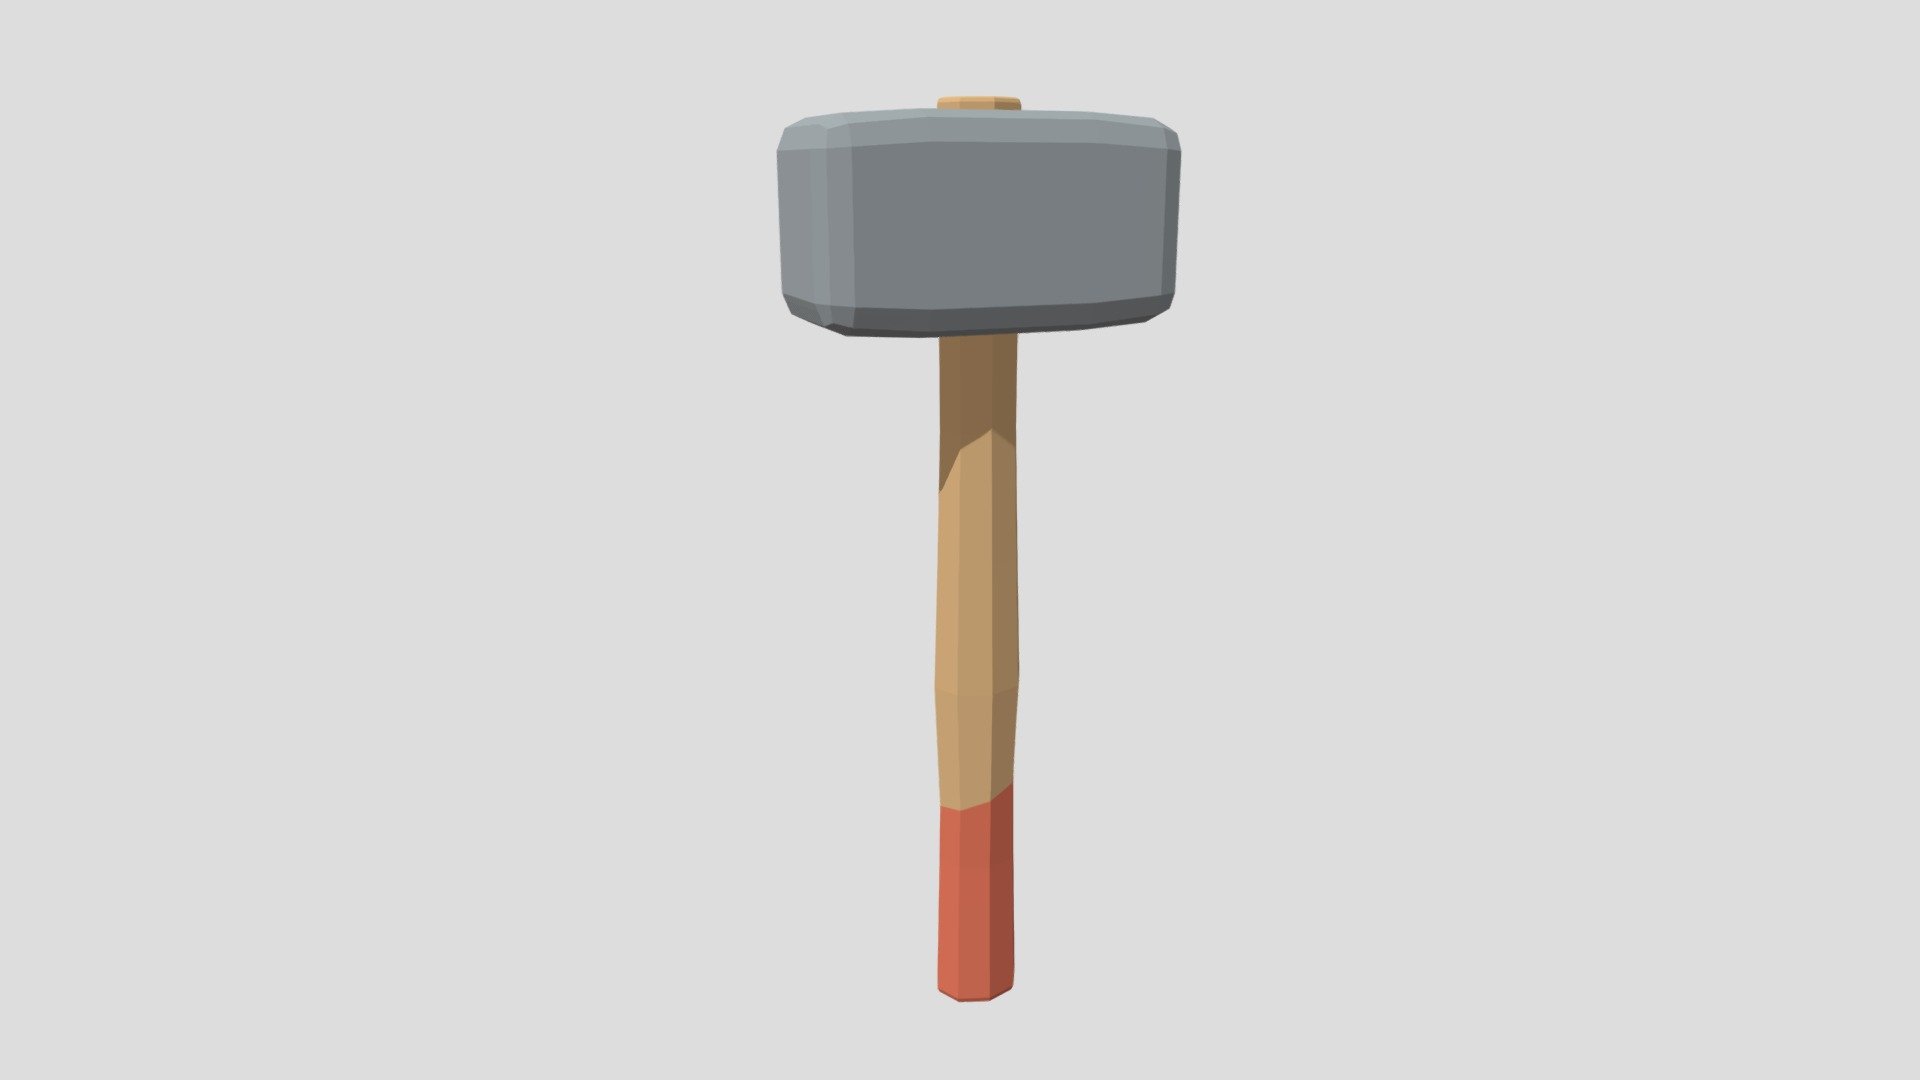 This is a low poly 3D model of a Sledgehammer. The low poly Sledgehammer was modeled and prepared for low-poly style renderings, background, general CG visualization presented as 1 mesh with quads only.

Verts : 186 Faces : 182.

The 3D model have simple materials with diffuse colors. 

No ring, maps and no UVW mapping is available.

The original file was created in blender. You will receive a 3DS, OBJ, FBX, blend, DAE, Stl, gLTF.

All preview images were rendered with Blender Cycles. Product is ready to render out-of-the-box. Please note that the lights, cameras, and background is only included in the .blend file. The model is clean and alone in the other provided files, centred at origin and has real-world scale 3d model